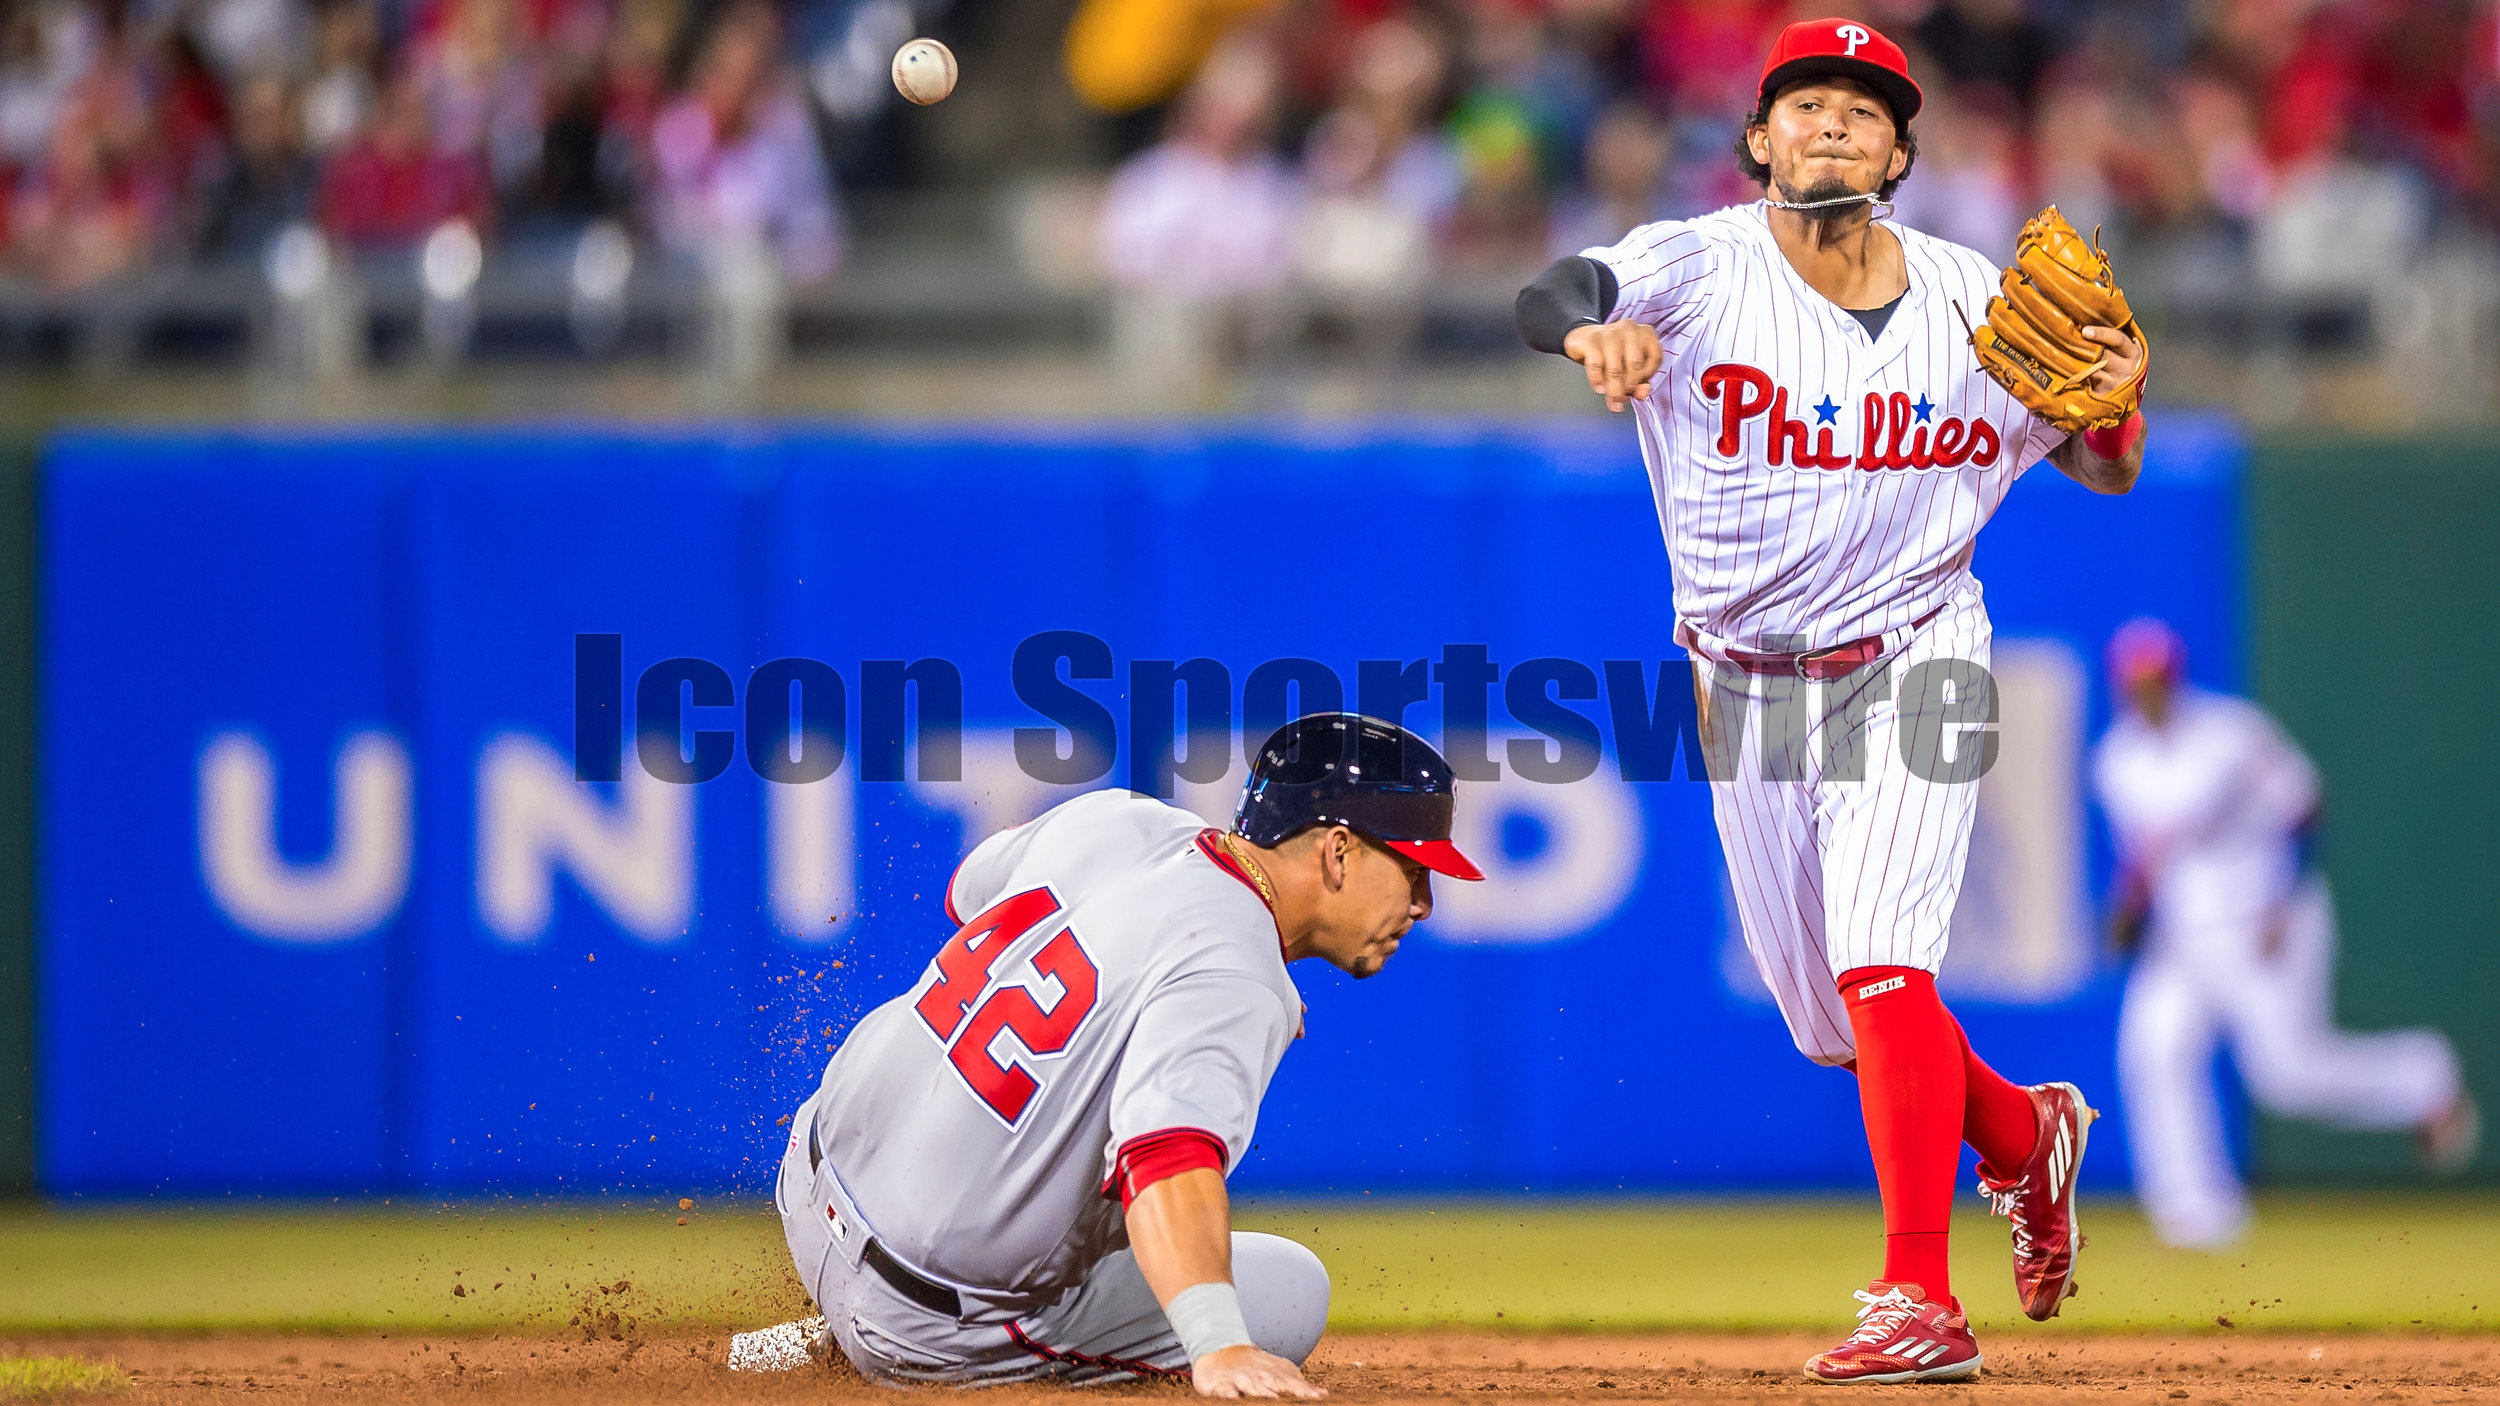  15 April 2016: Philadelphia Phillies shortstop Freddy Galvis makes the tag at second at throws to first attempting the double play during the MLB game between the Philadelphia Phillies and the Washington Nationals played at Citizens Bank Park in Phi